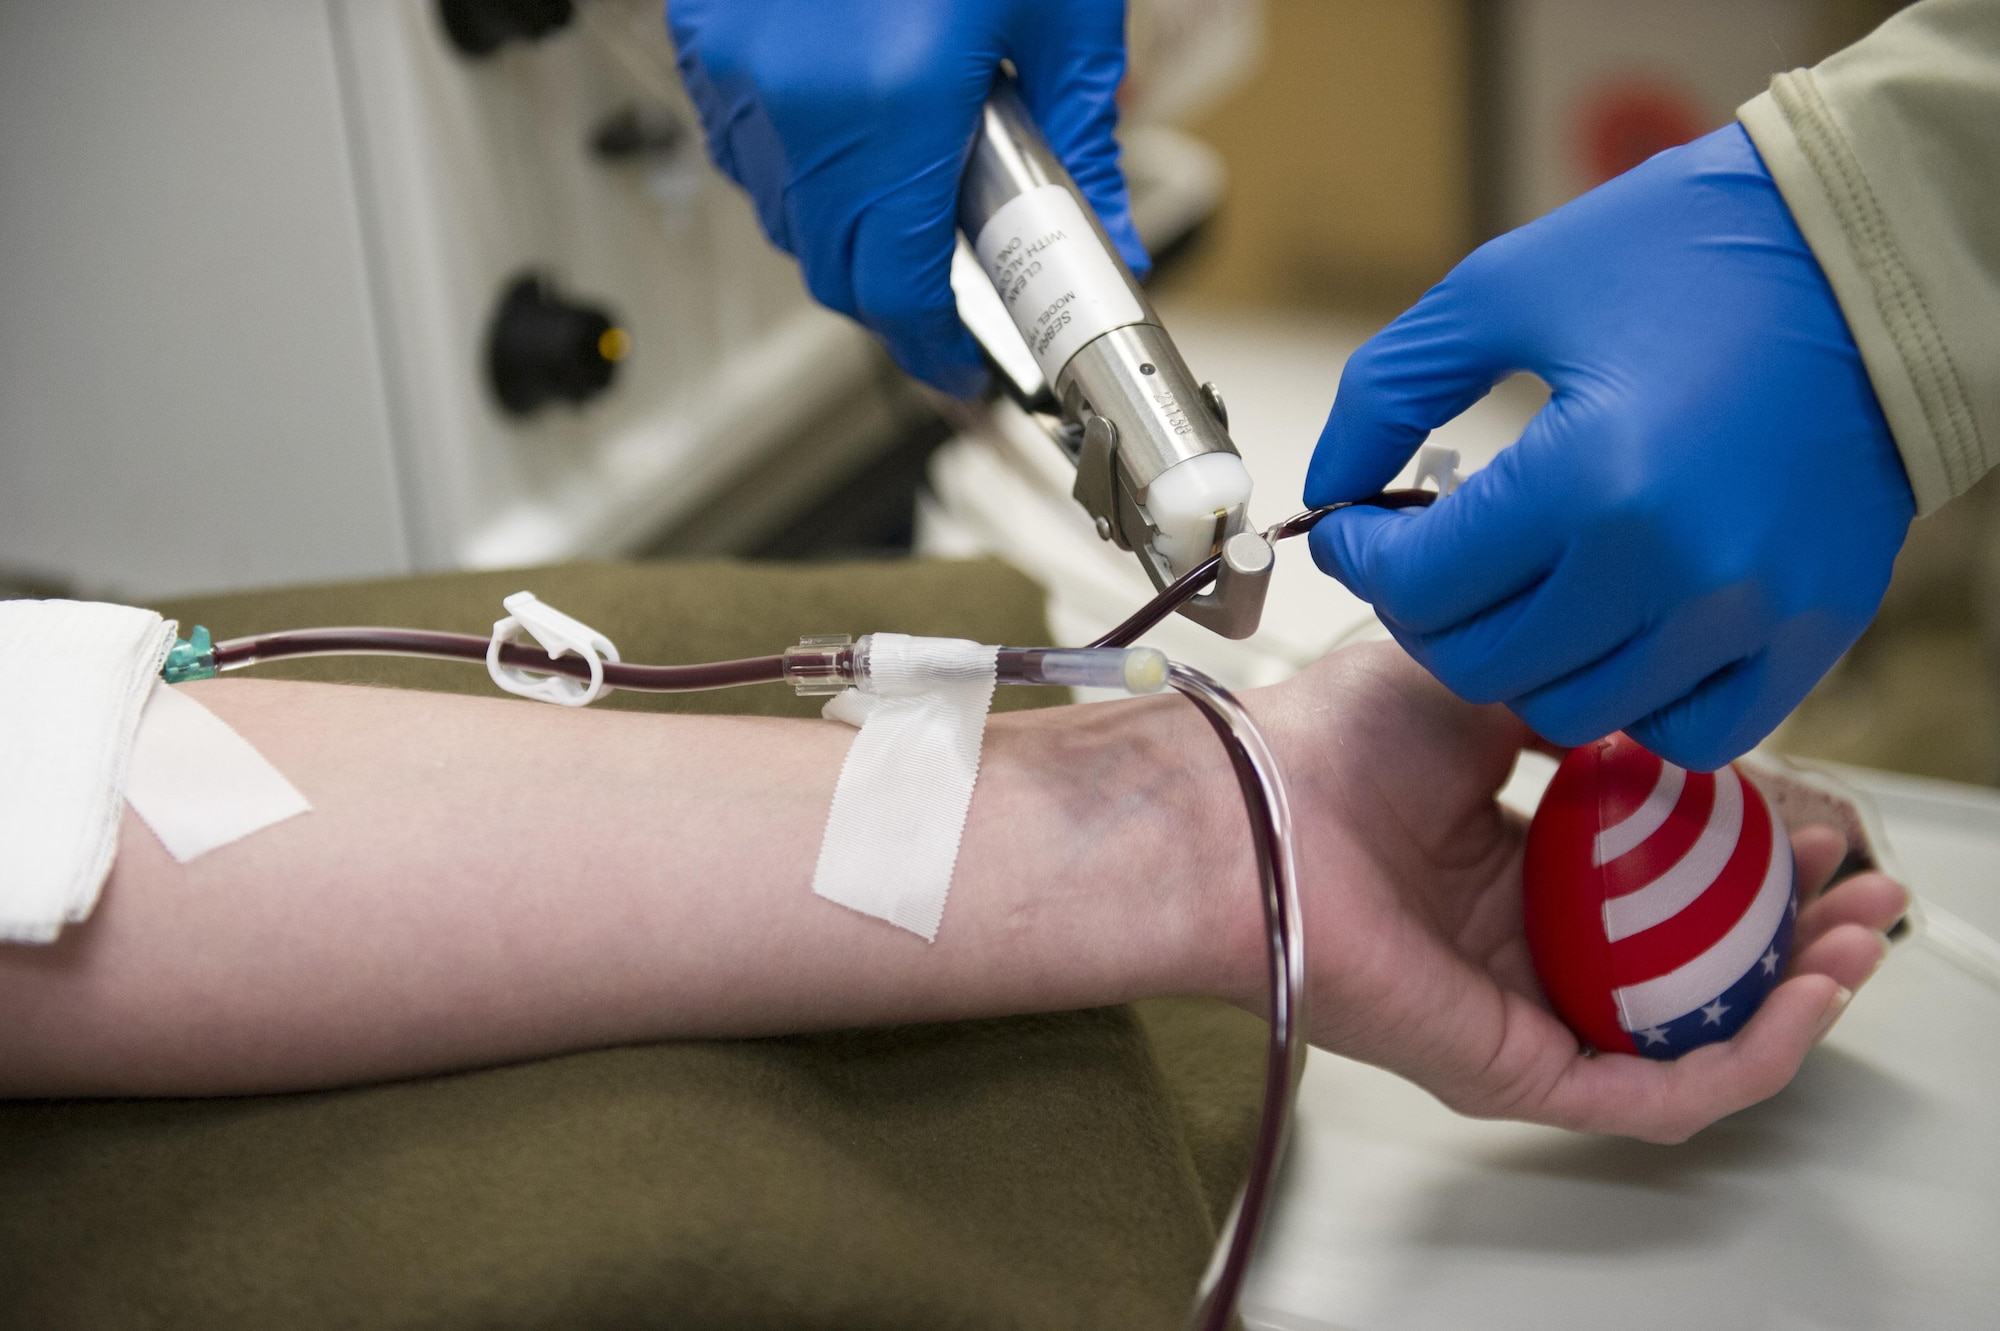 Spc. Lauren O'Neal, 153rd Blood Support Detachment medical laboratory technician, uses a hemosealer to seal blood bag tubing attached to a platelet donor at Craig Joint Theater Hospital on Bagram Airfield, Afghanistan, Dec. 31, 2015. In order to extract platelets, a critical life-saving blood component, blood is drawn using an apheresis machine which separates and returns the unused portions of blood to the donor. (U.S. Air Force photo/Tech. Sgt. Robert Cloys)